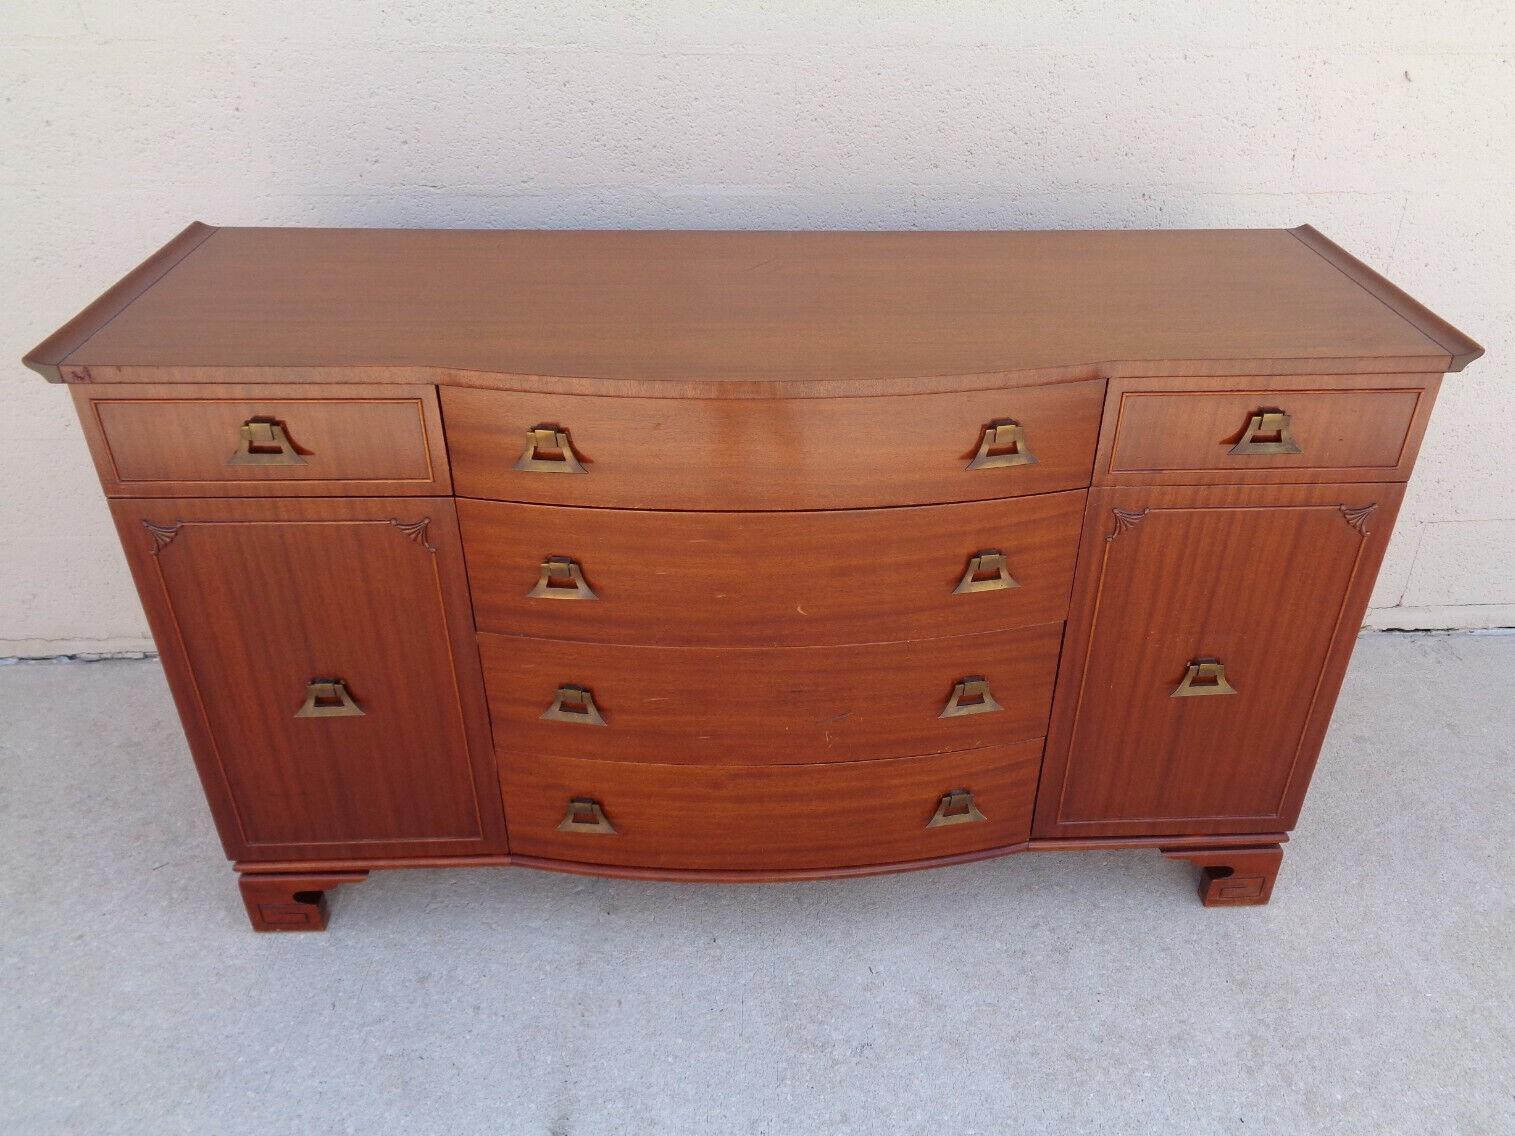 Vintage James Mont style pagoda form sideboard buffet manufactured by RWay Northern Furniture Company. Sideboard has Ming style feet with a Greek Key motif and original distinctive solid brass decorative pulls. Ample room to store items in six